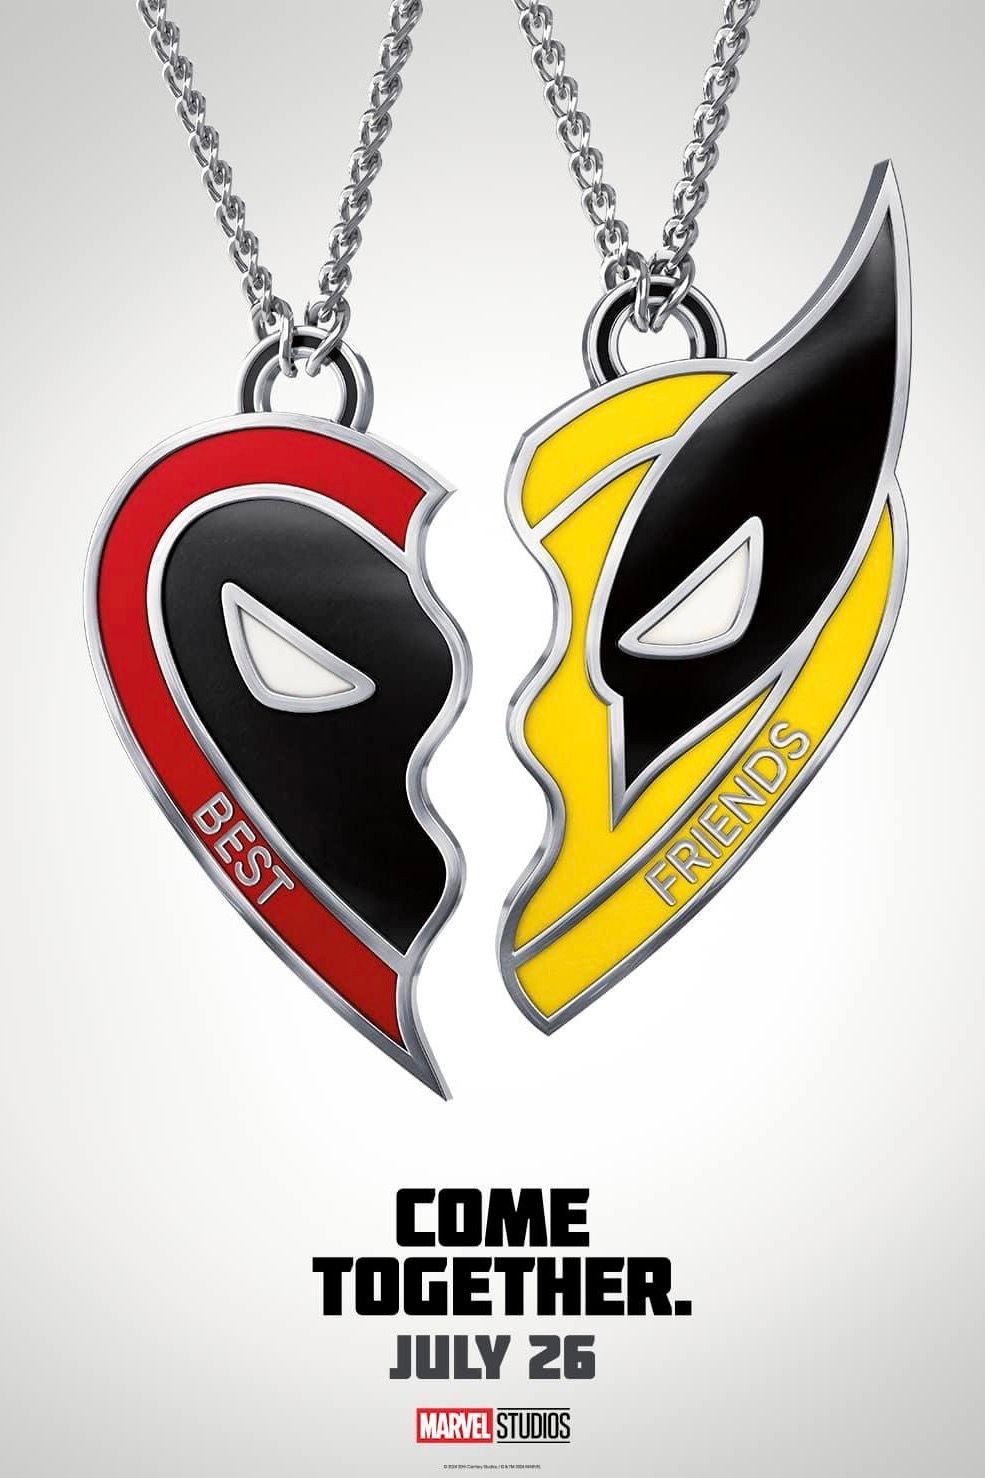 Deadpool 3 poster showing two halves of a heart necklace featuring Wolverine and Deadpool